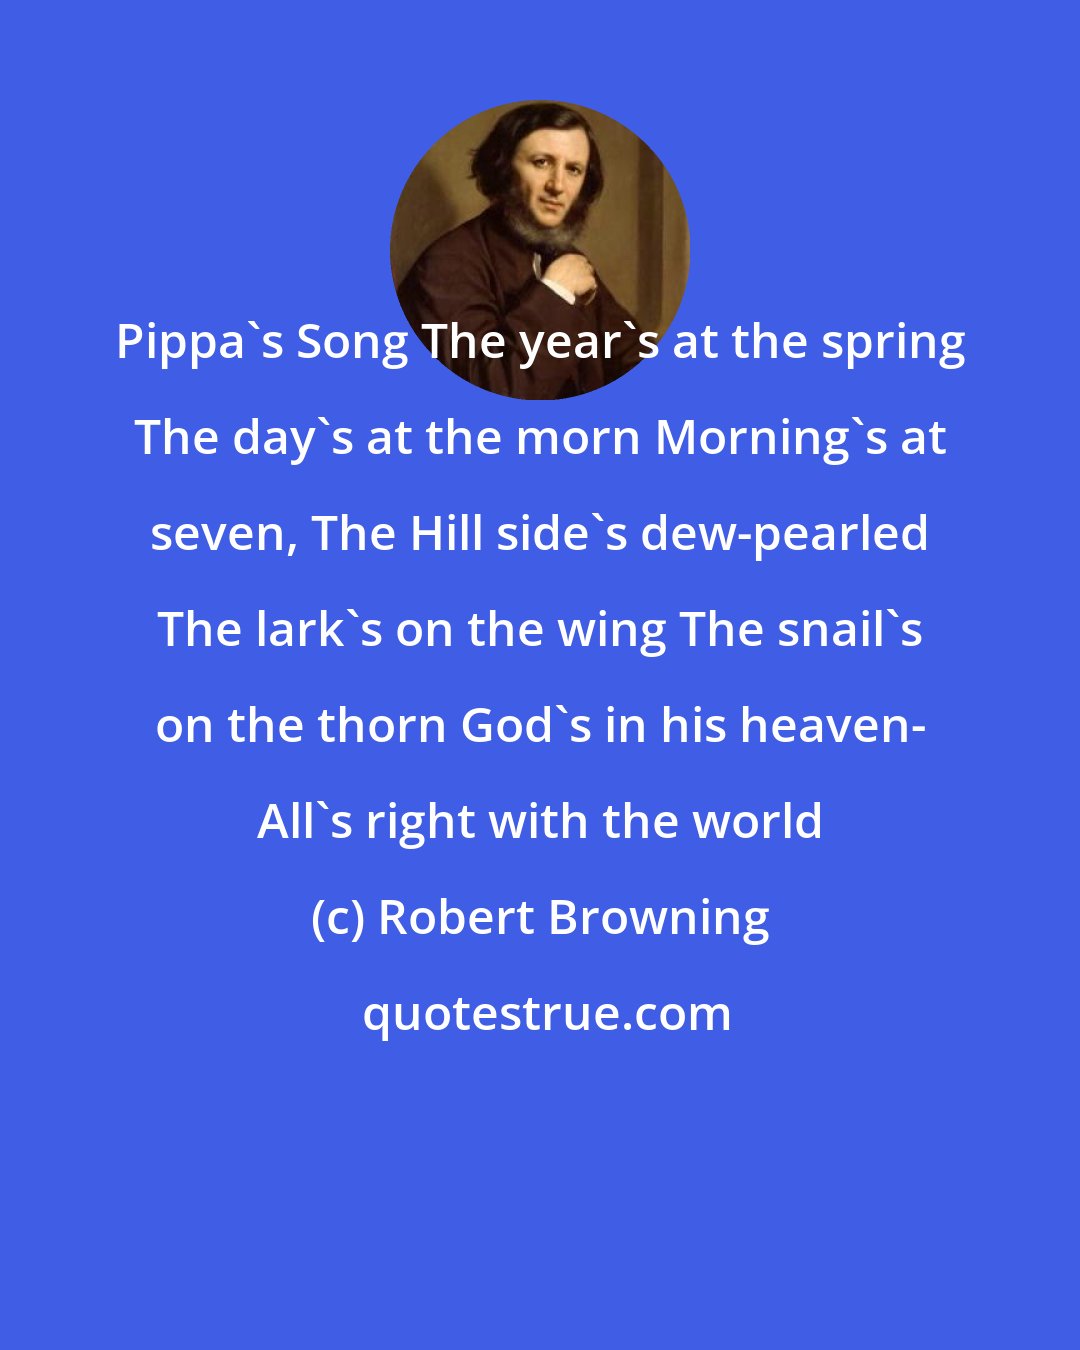 Robert Browning: Pippa's Song The year's at the spring The day's at the morn Morning's at seven, The Hill side's dew-pearled The lark's on the wing The snail's on the thorn God's in his heaven- All's right with the world